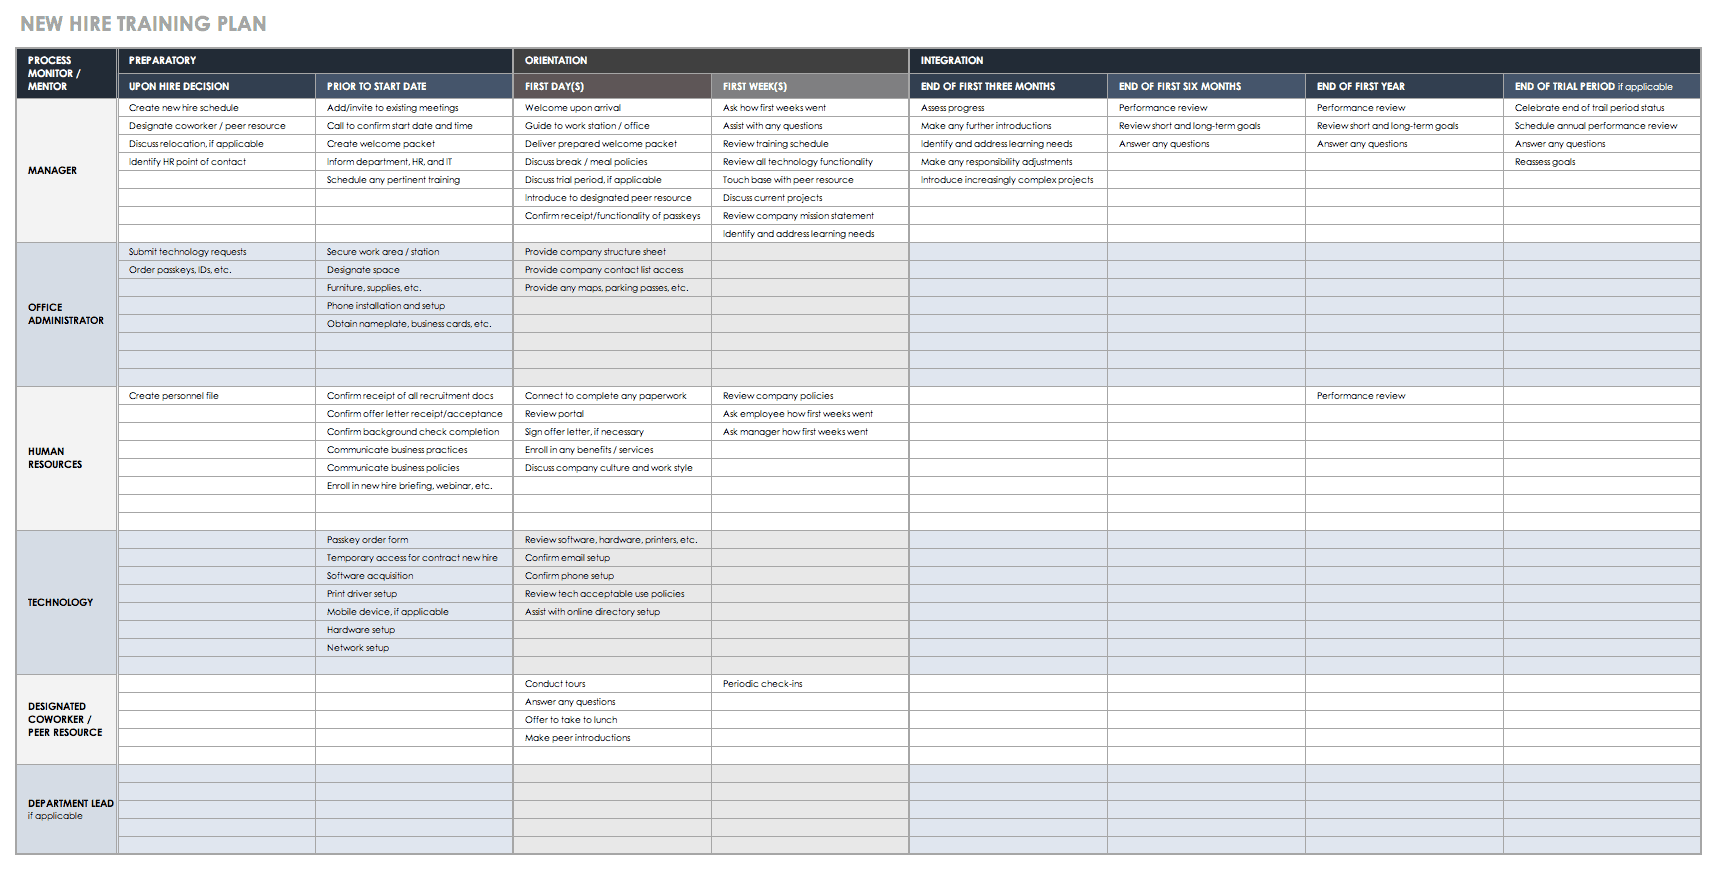 New Hire Training Plan Template